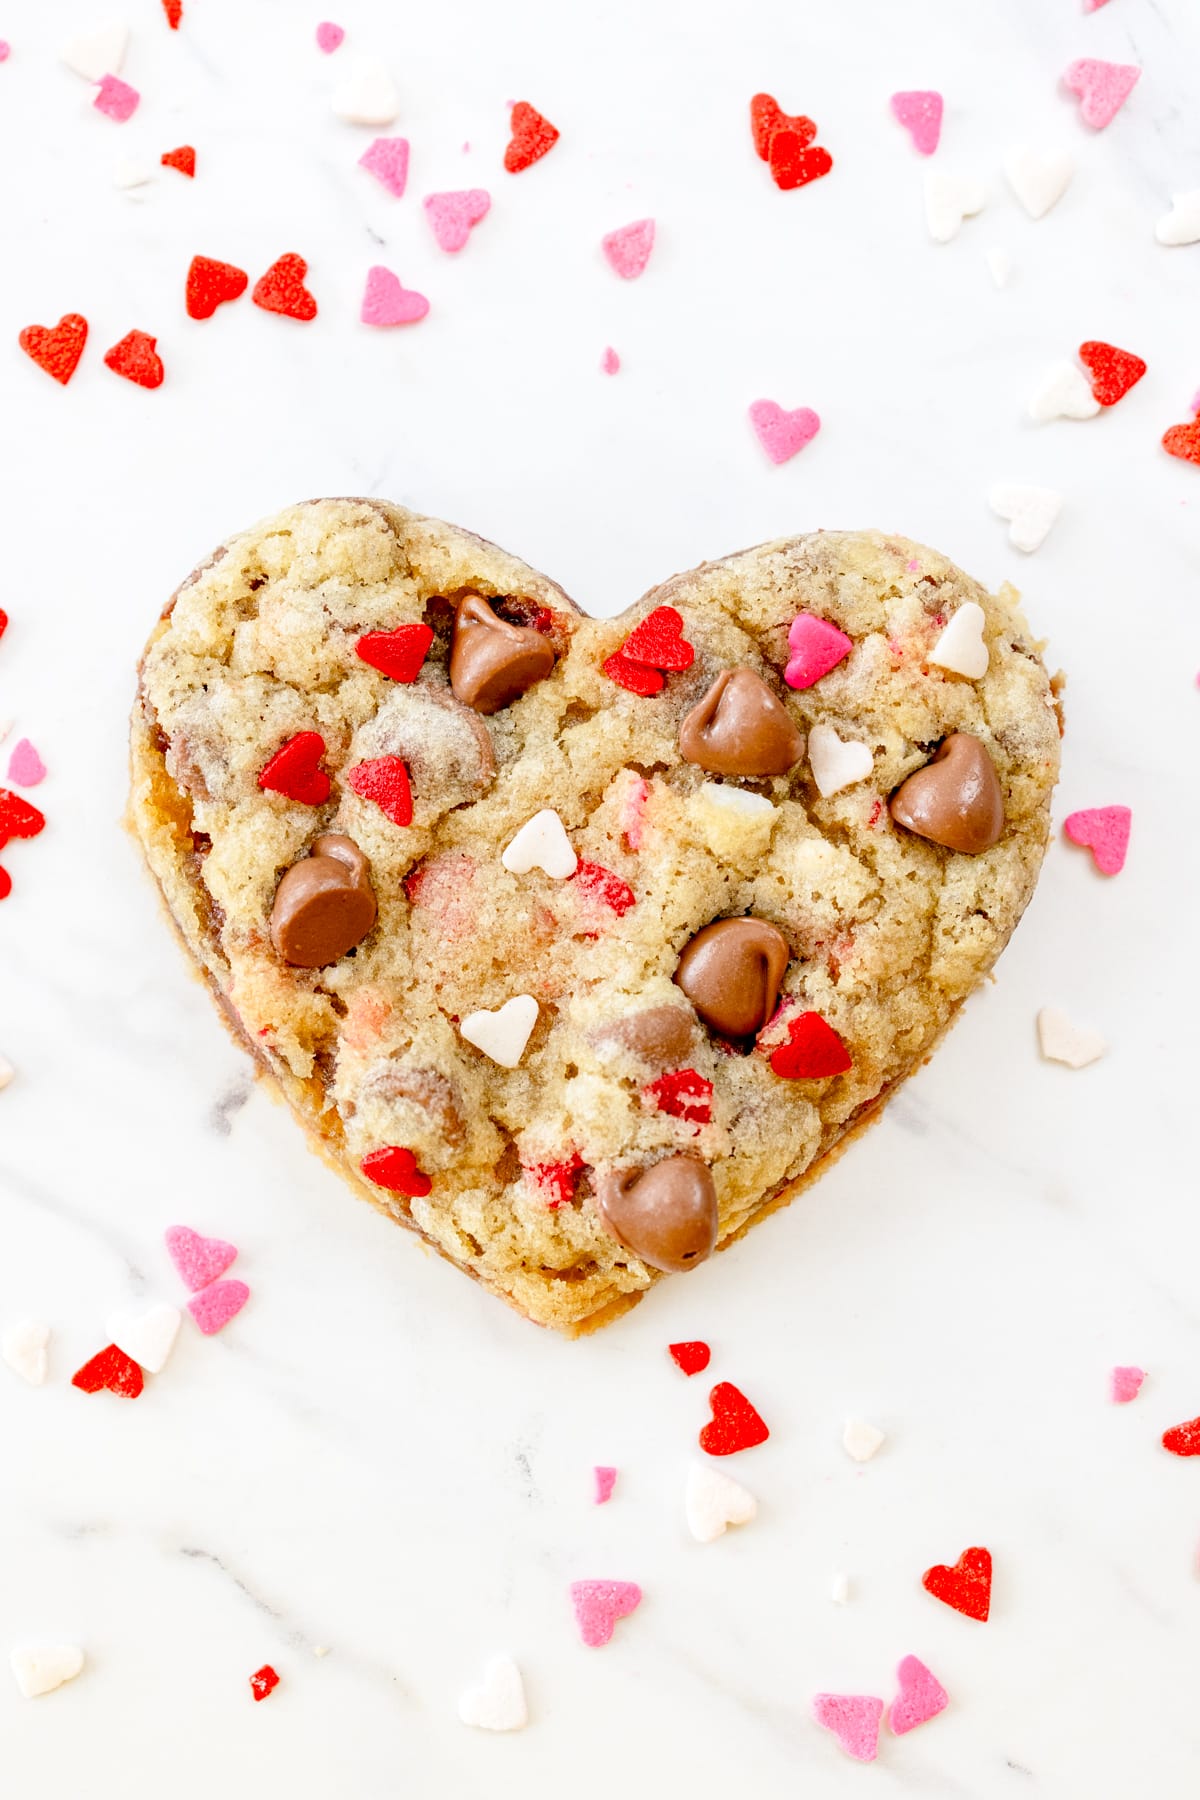 Top view of a heart shaped cookie on a white surface, and there are love heart decorations around the cookie.